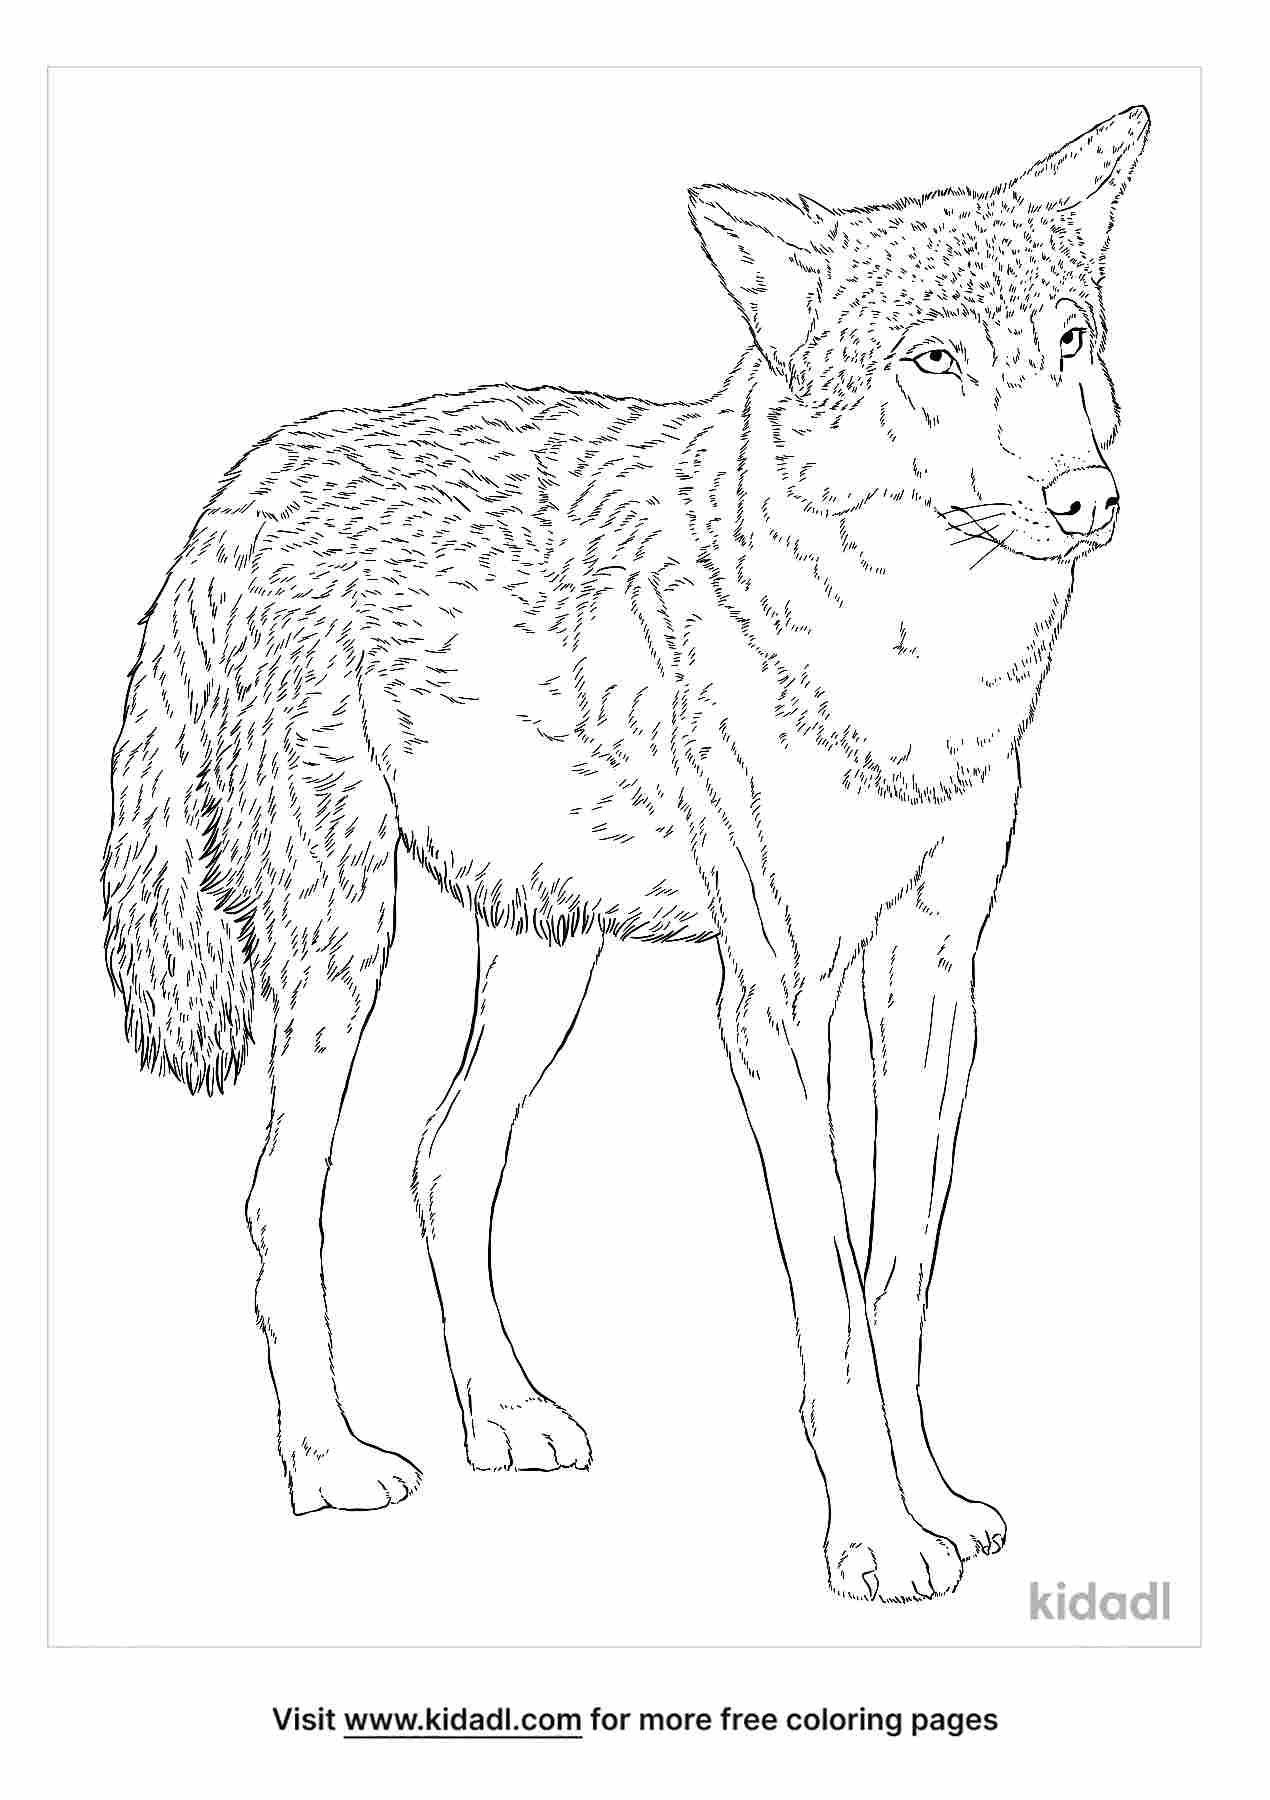 Enjoy coloring this sketch of Indian Wolf.